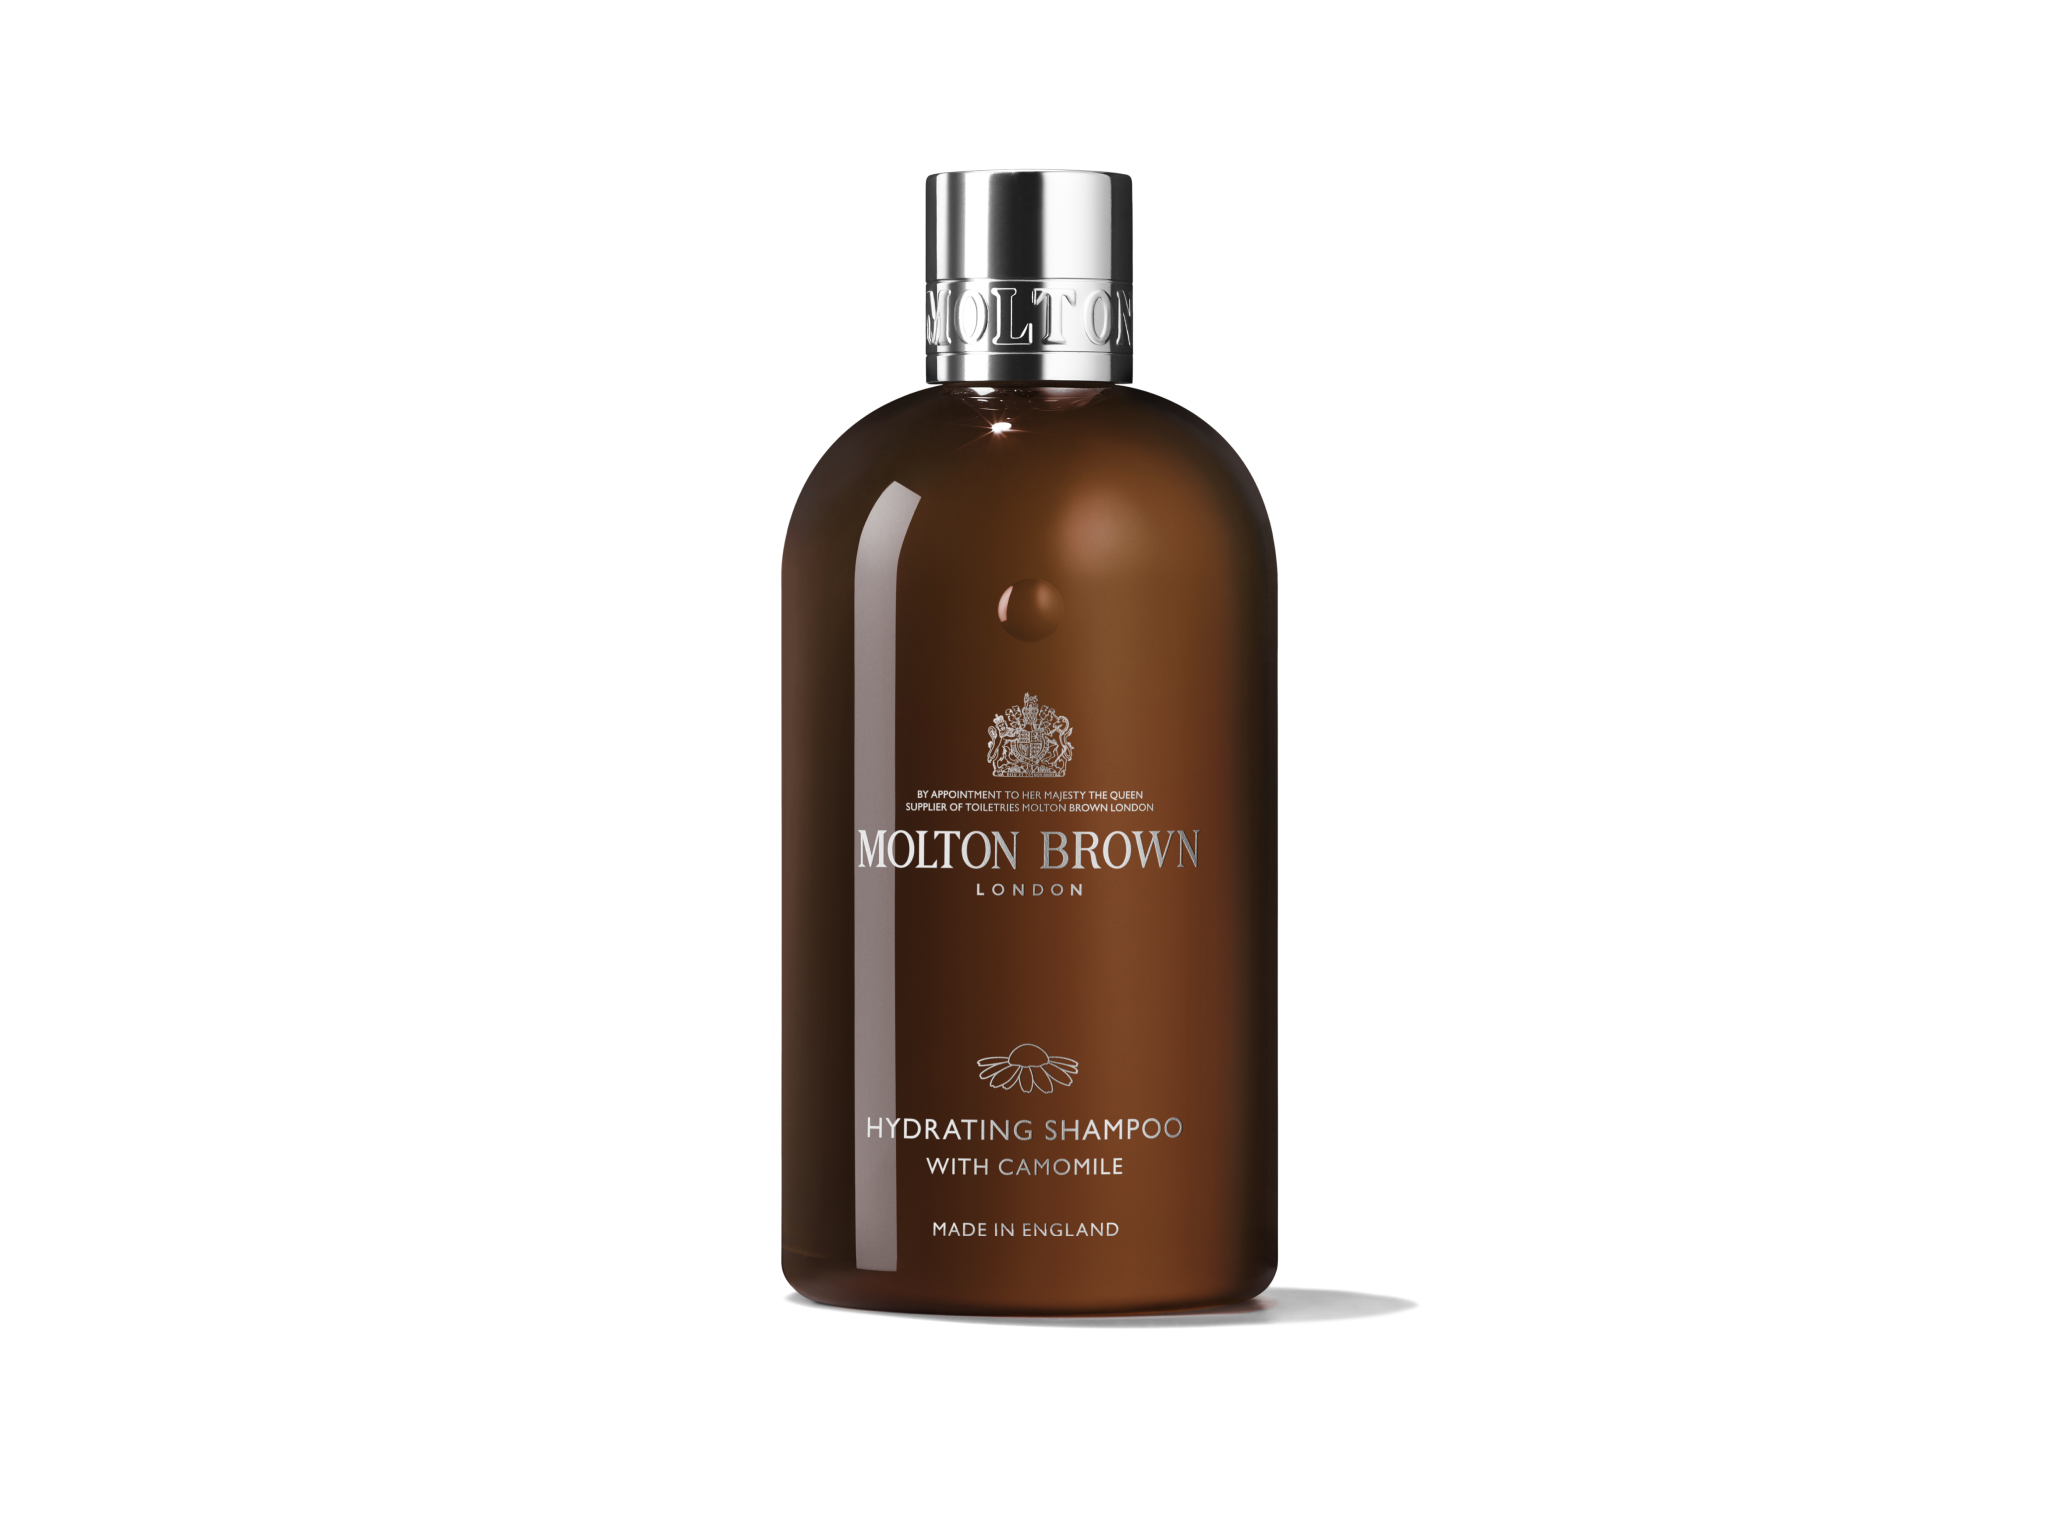 Molton Brown hydrating shampoo with camomile